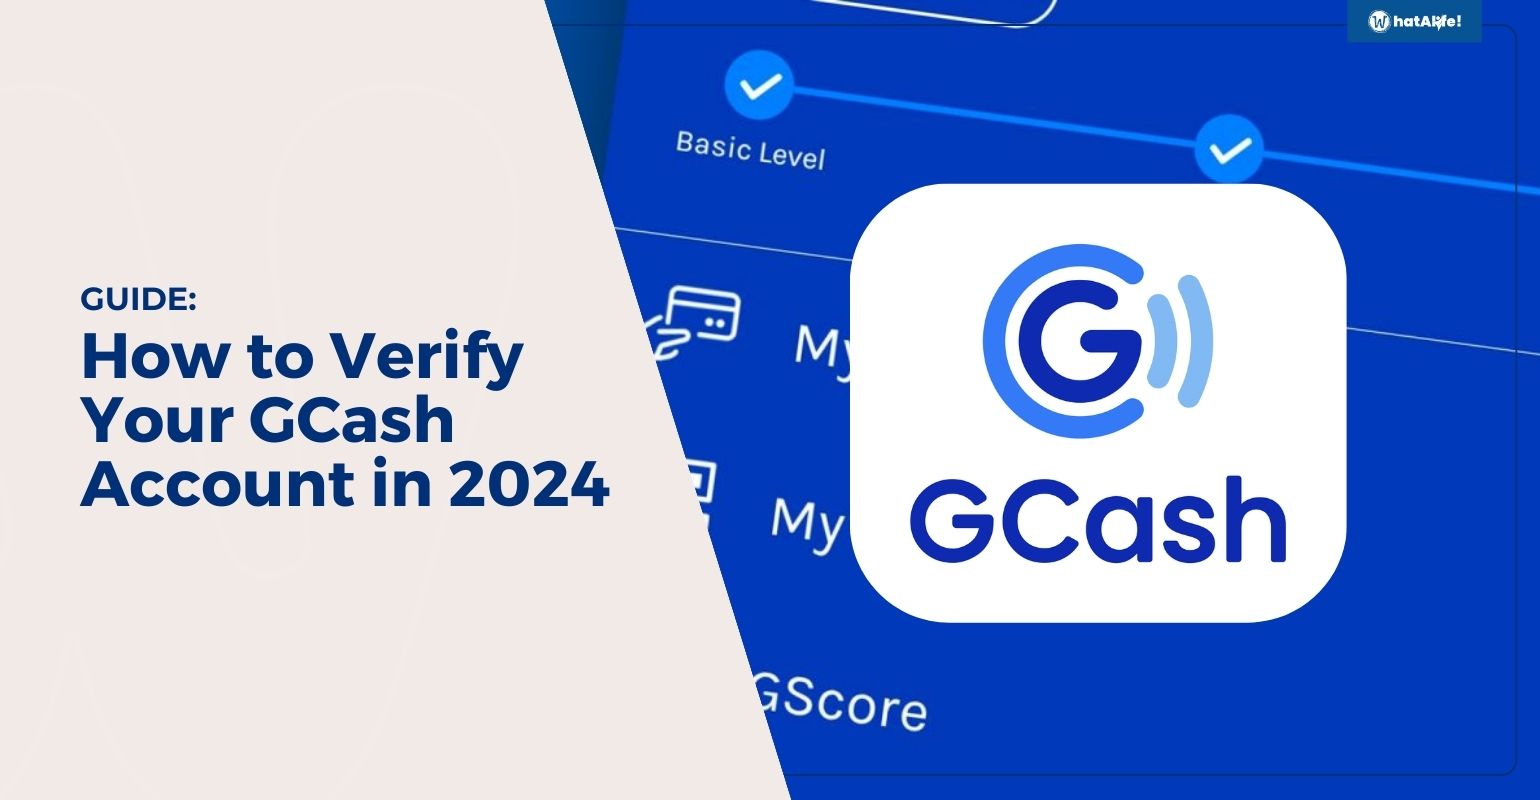 guide how to verify your gcash account in 2024